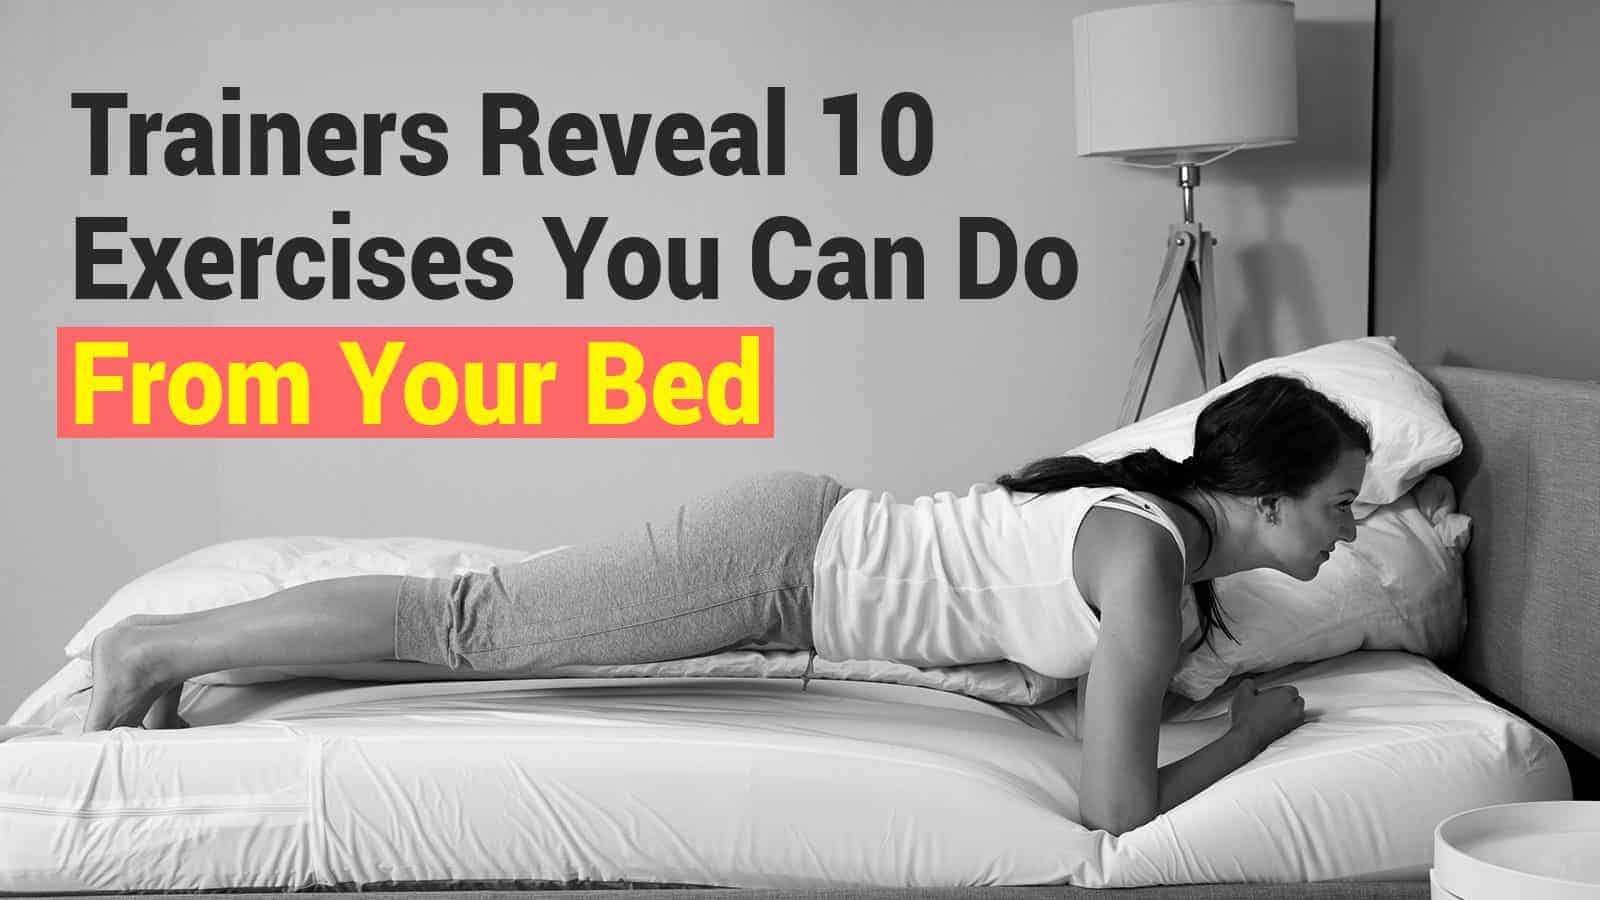 Trainers Reveal 10 Exercises You Can Do From Your Bed